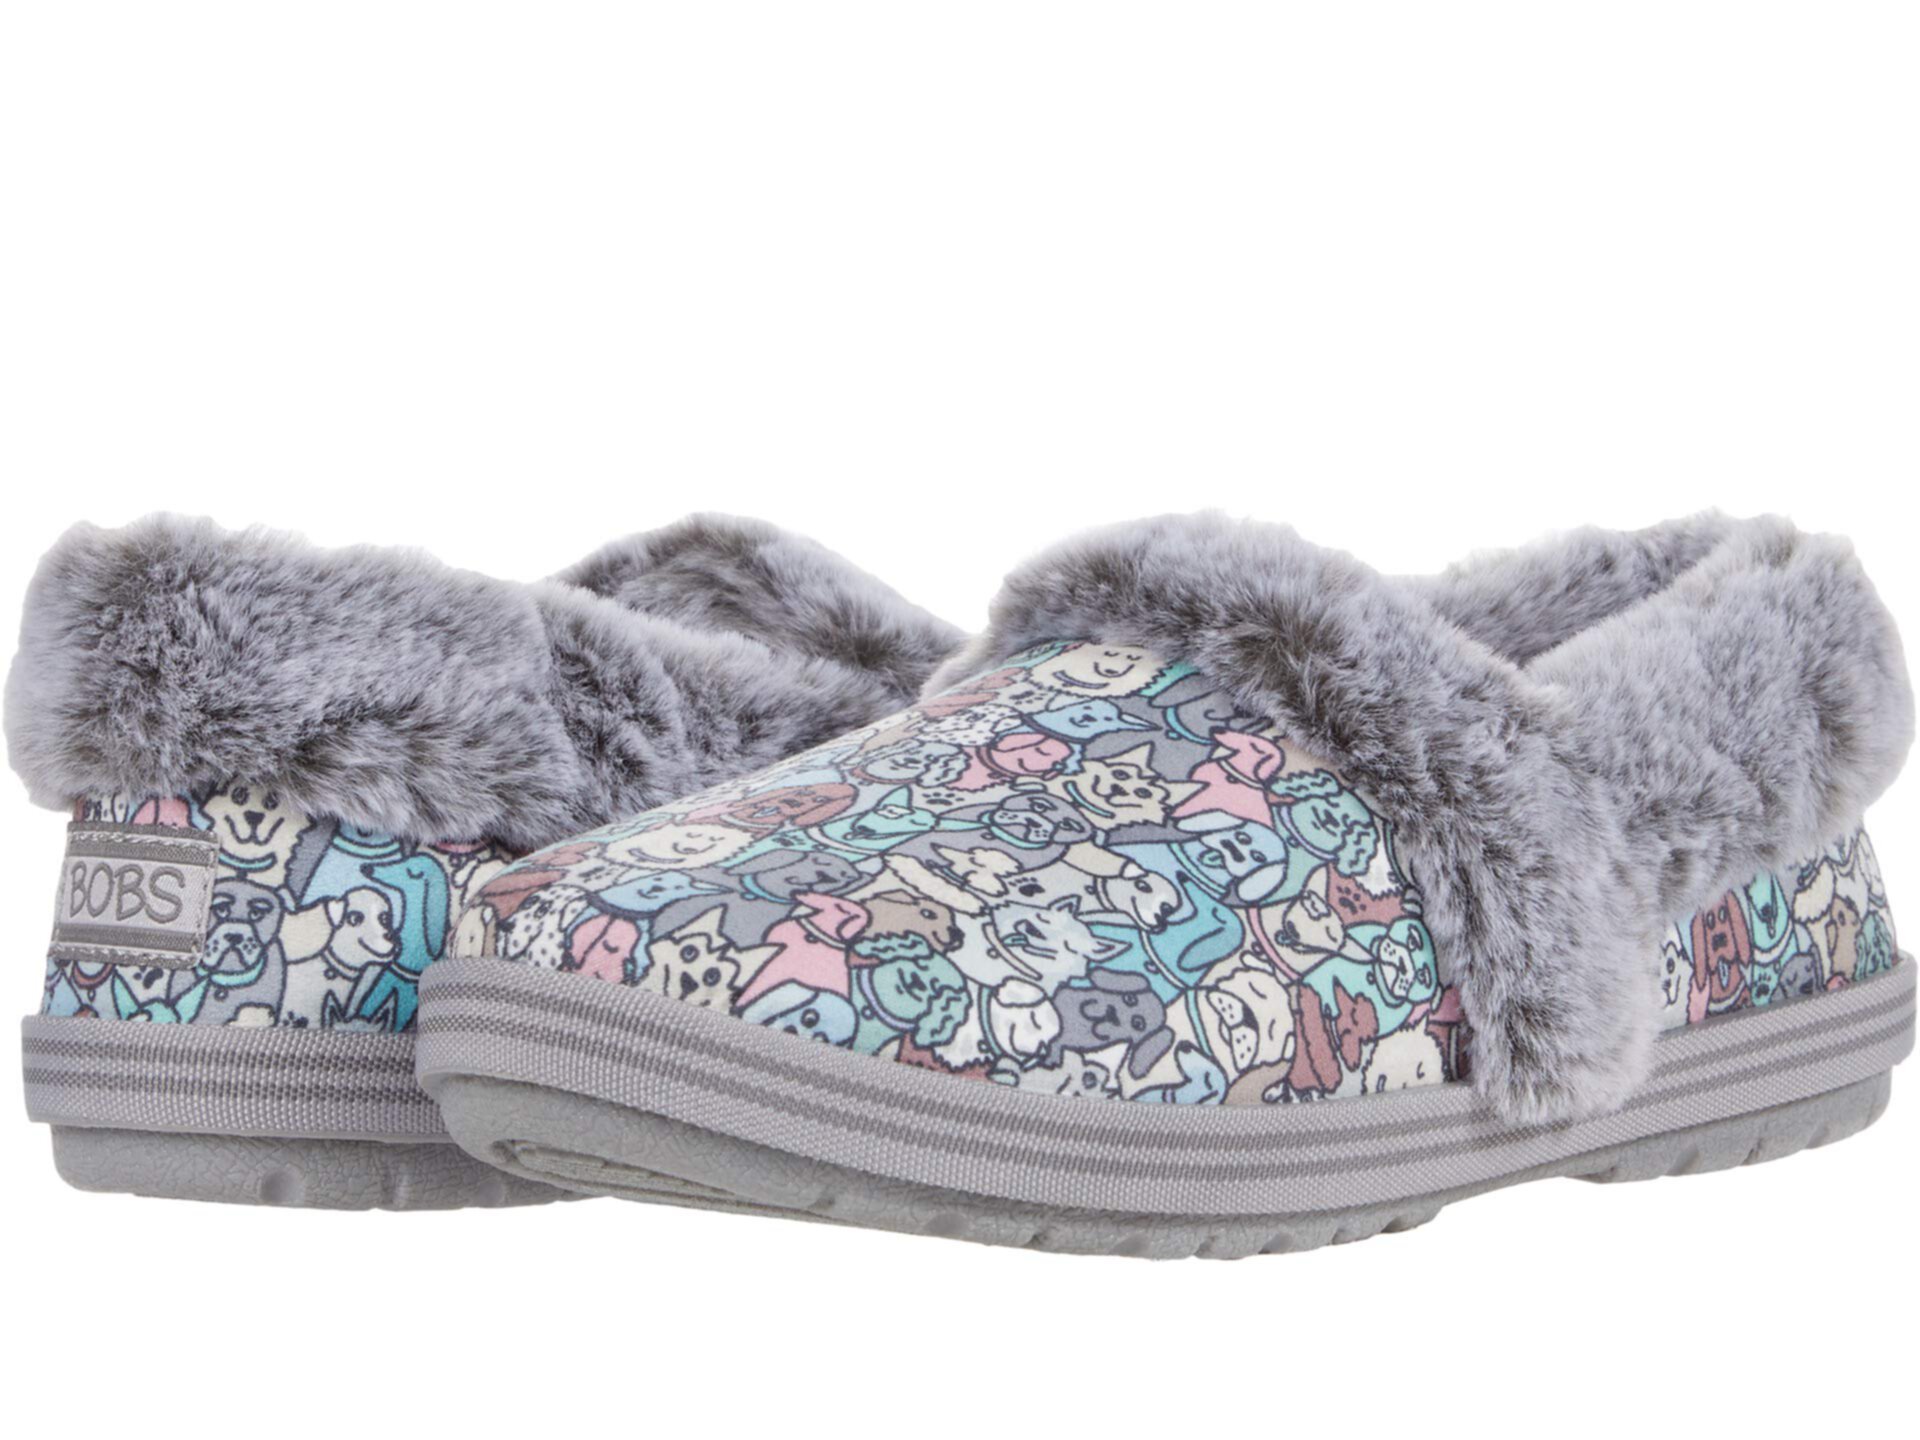 Too Cosy - Pooch Parade BOBS from SKECHERS